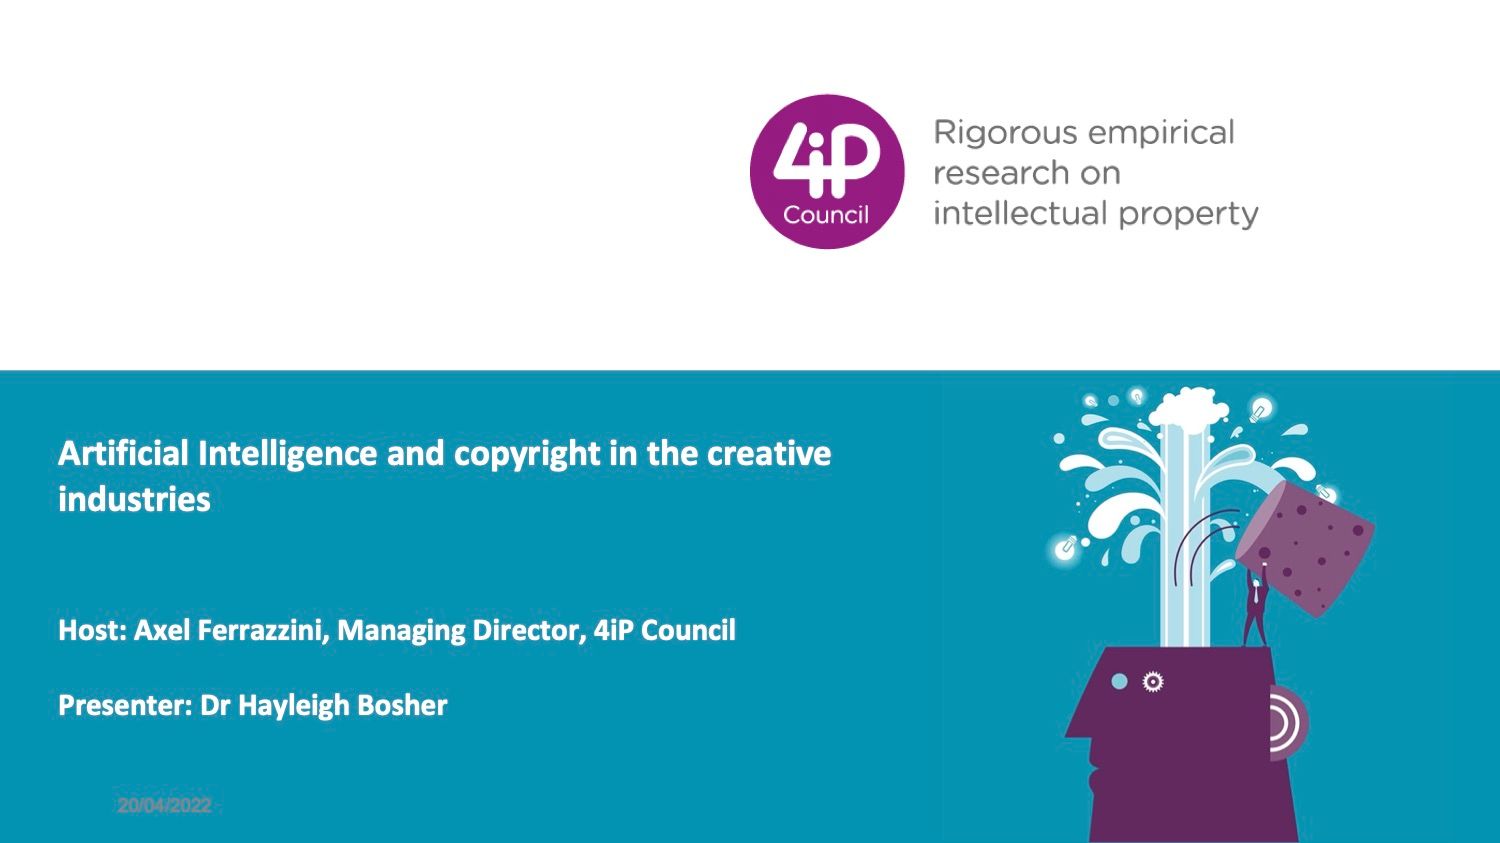 Artificial Intelligence and copyright in the creative industries